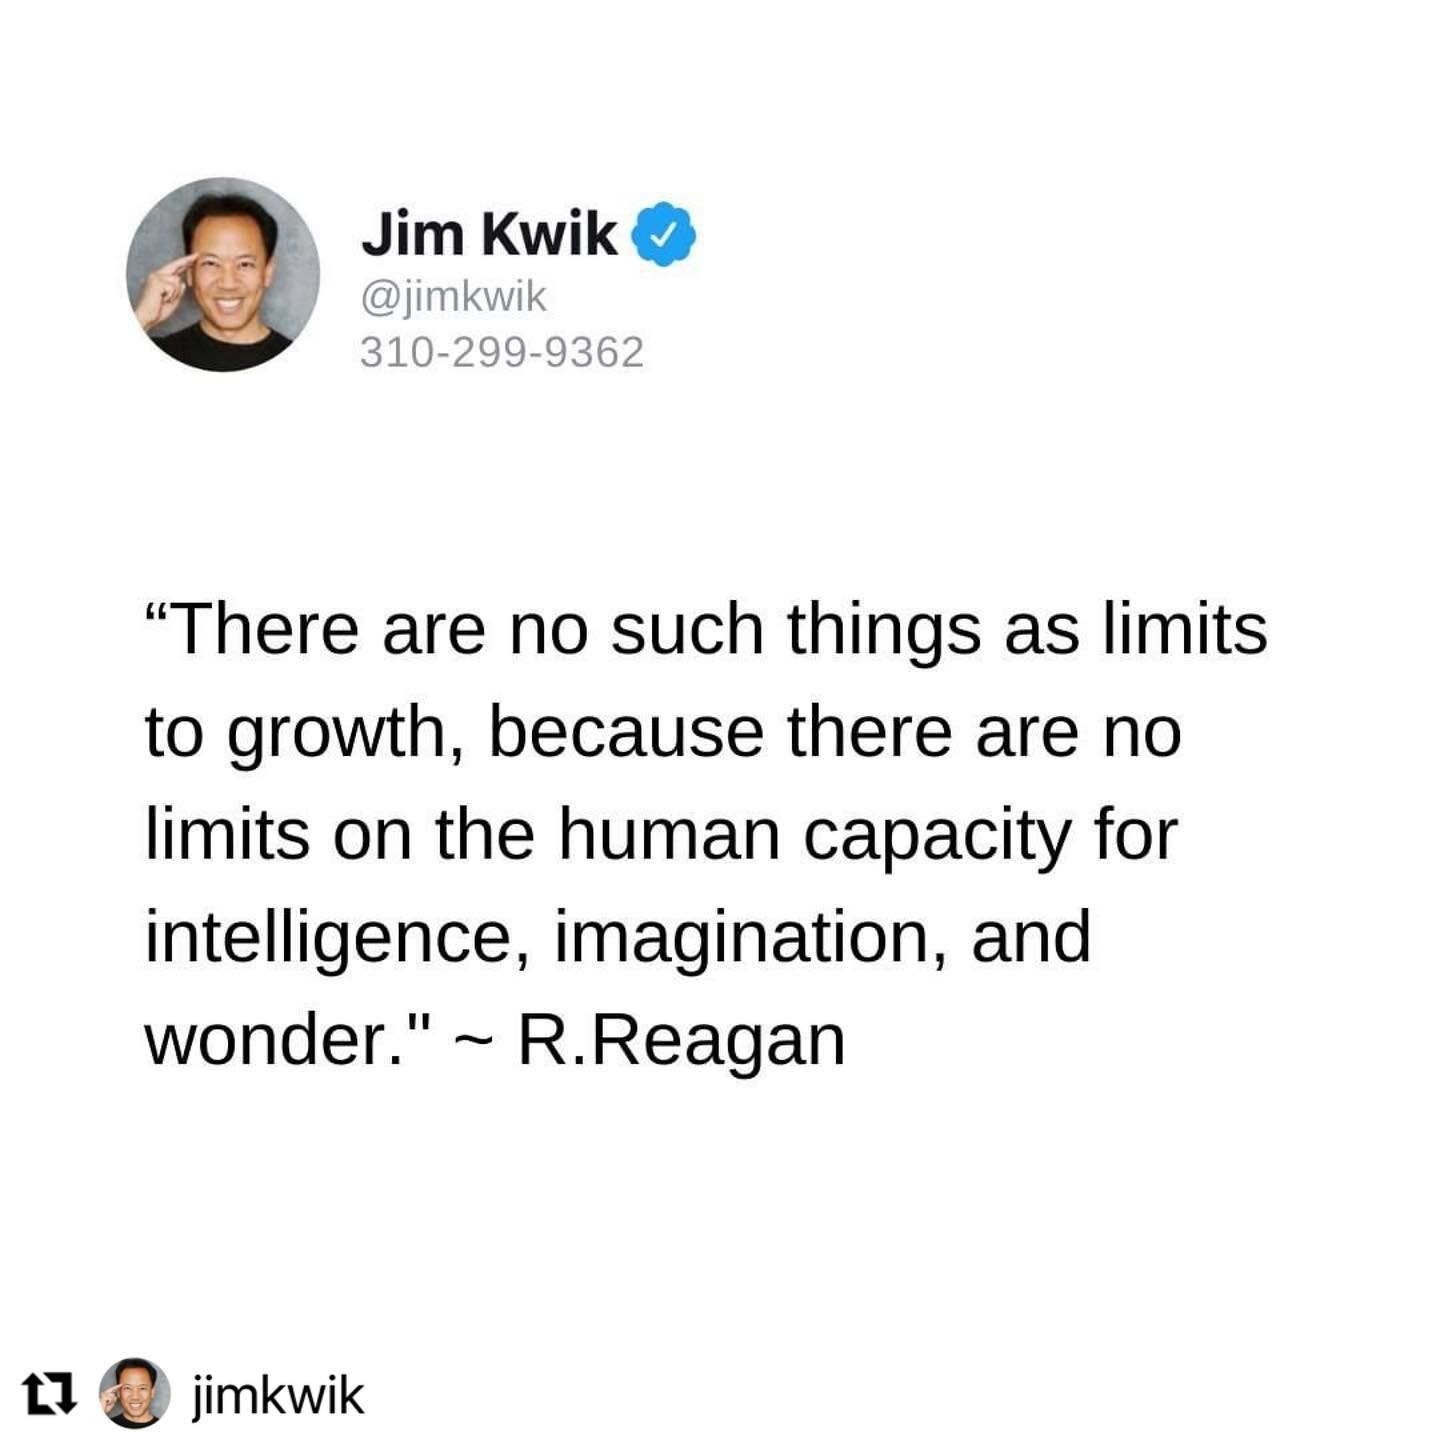 There are no limits! Always love inspiration and growth from @jimkwik! #iamlimitless #yesyoucan #letsgo #healthylifestyle @californiaelitefitness